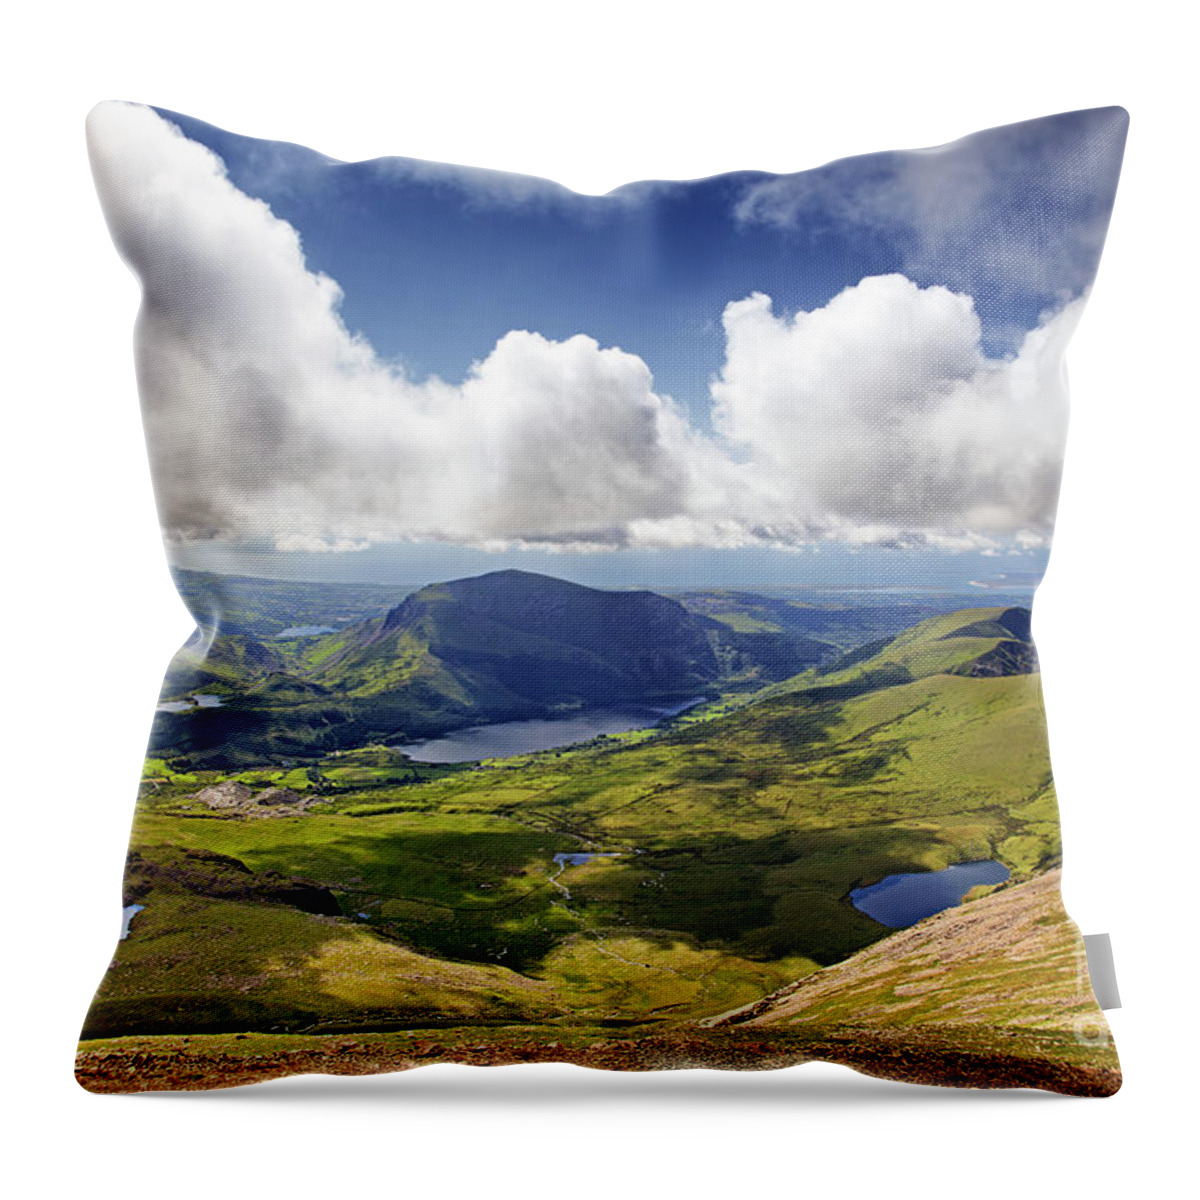 Beautiful Throw Pillow featuring the photograph Snowdonia landscape by Jane Rix